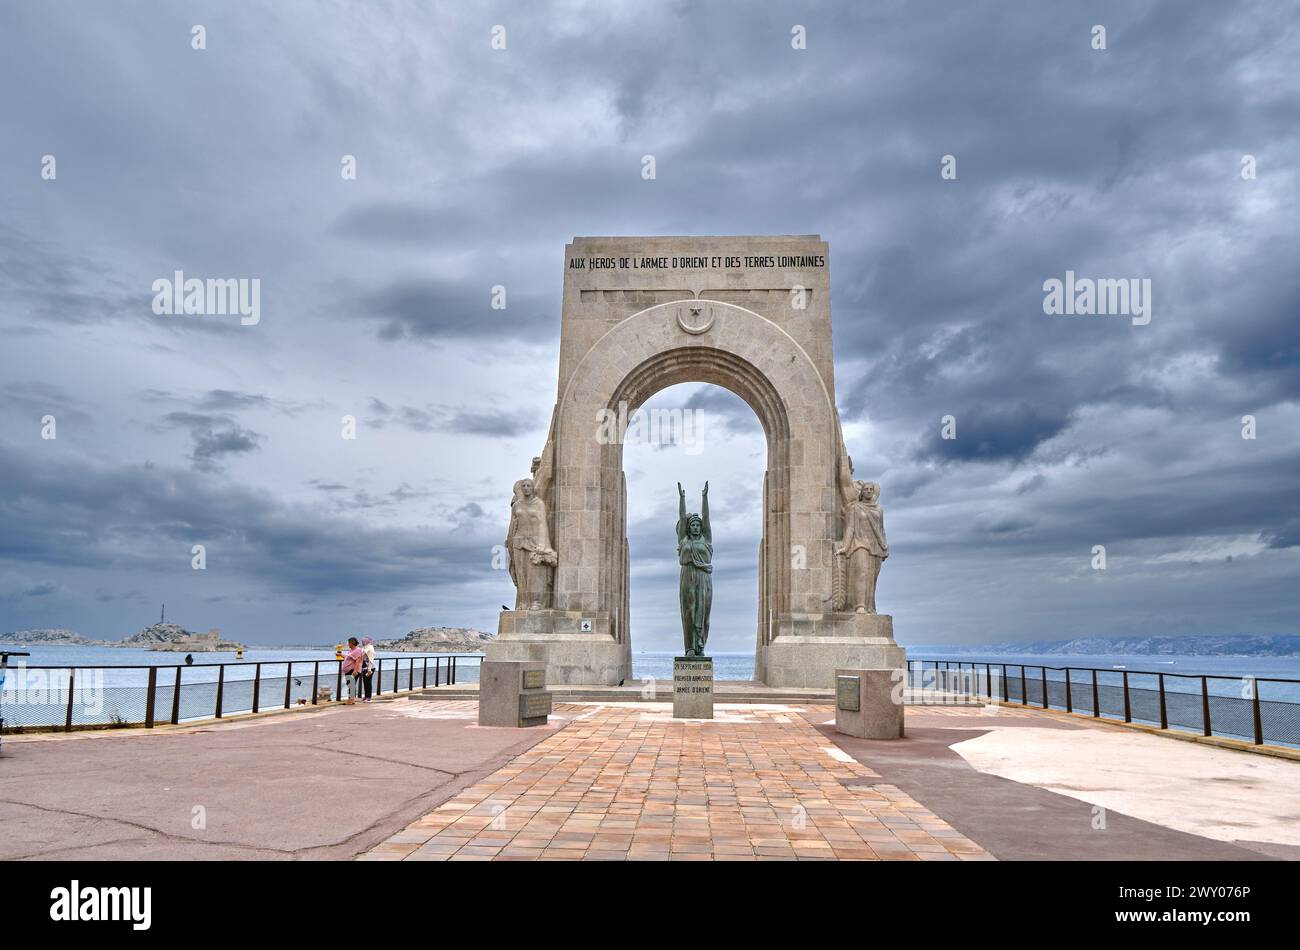 A War Memorial - Army of the East and Distant Lands by the Mediterranean Sea. Vallons des Auffes, Marseille. France Stock Photo